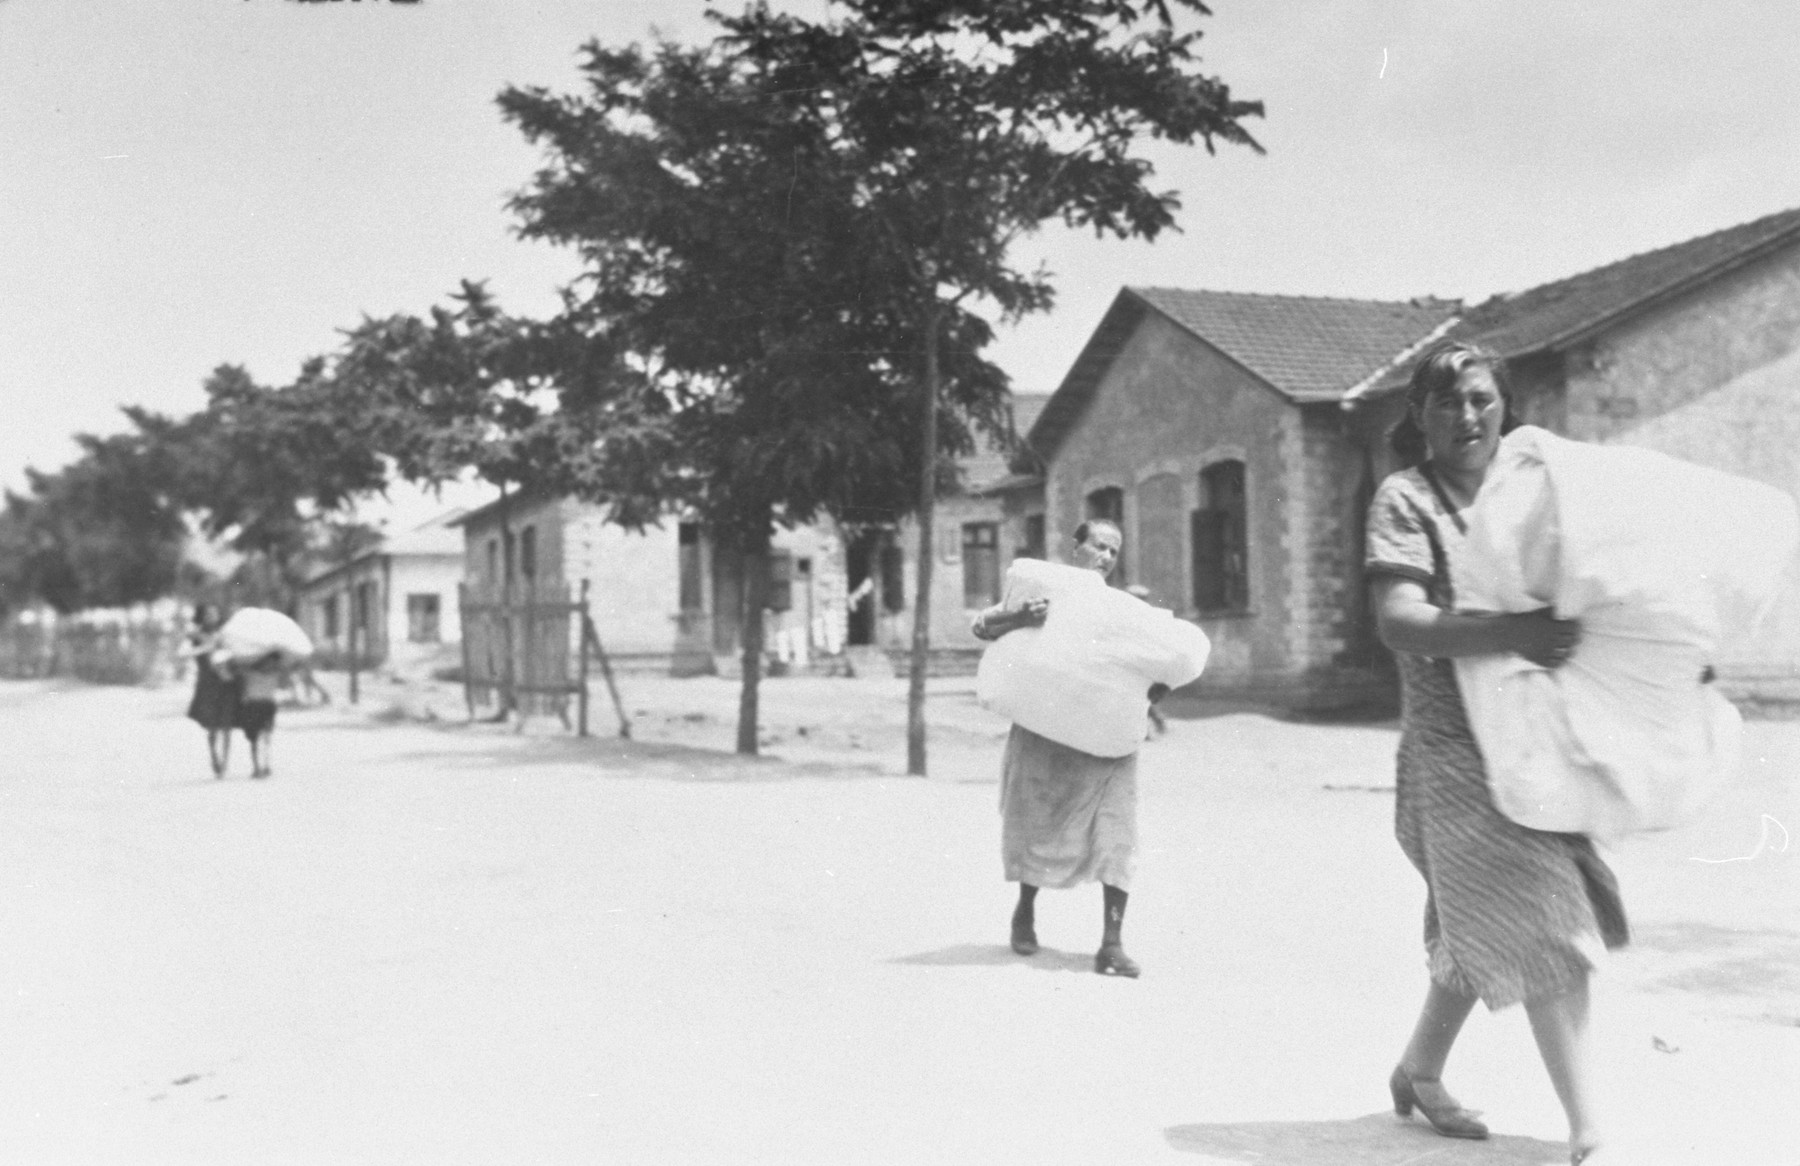 Jewish women leave their homes out of fear of another attack after the pogrom of June 29, 1931.